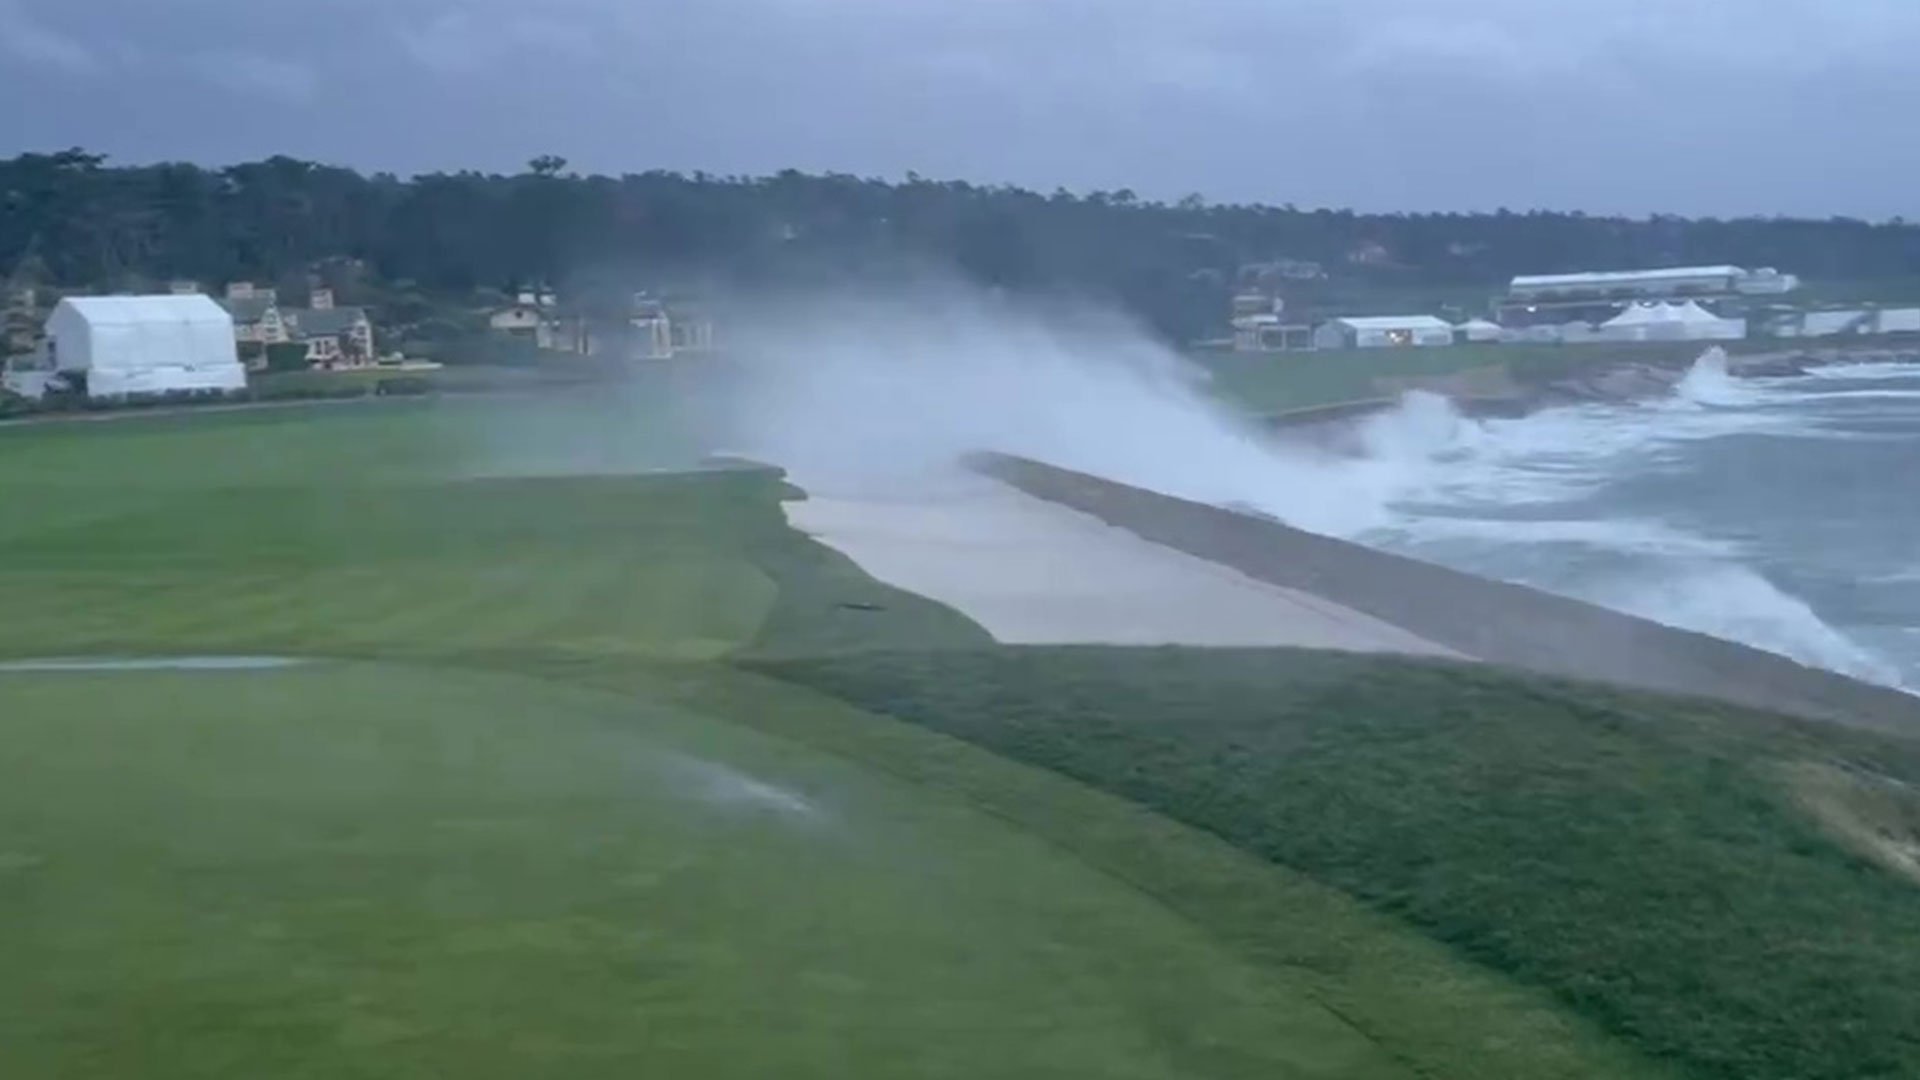 Incredible video shows giant waves flooding golf course at Pebble Beach as final round of Pro-Am is POSTPONED